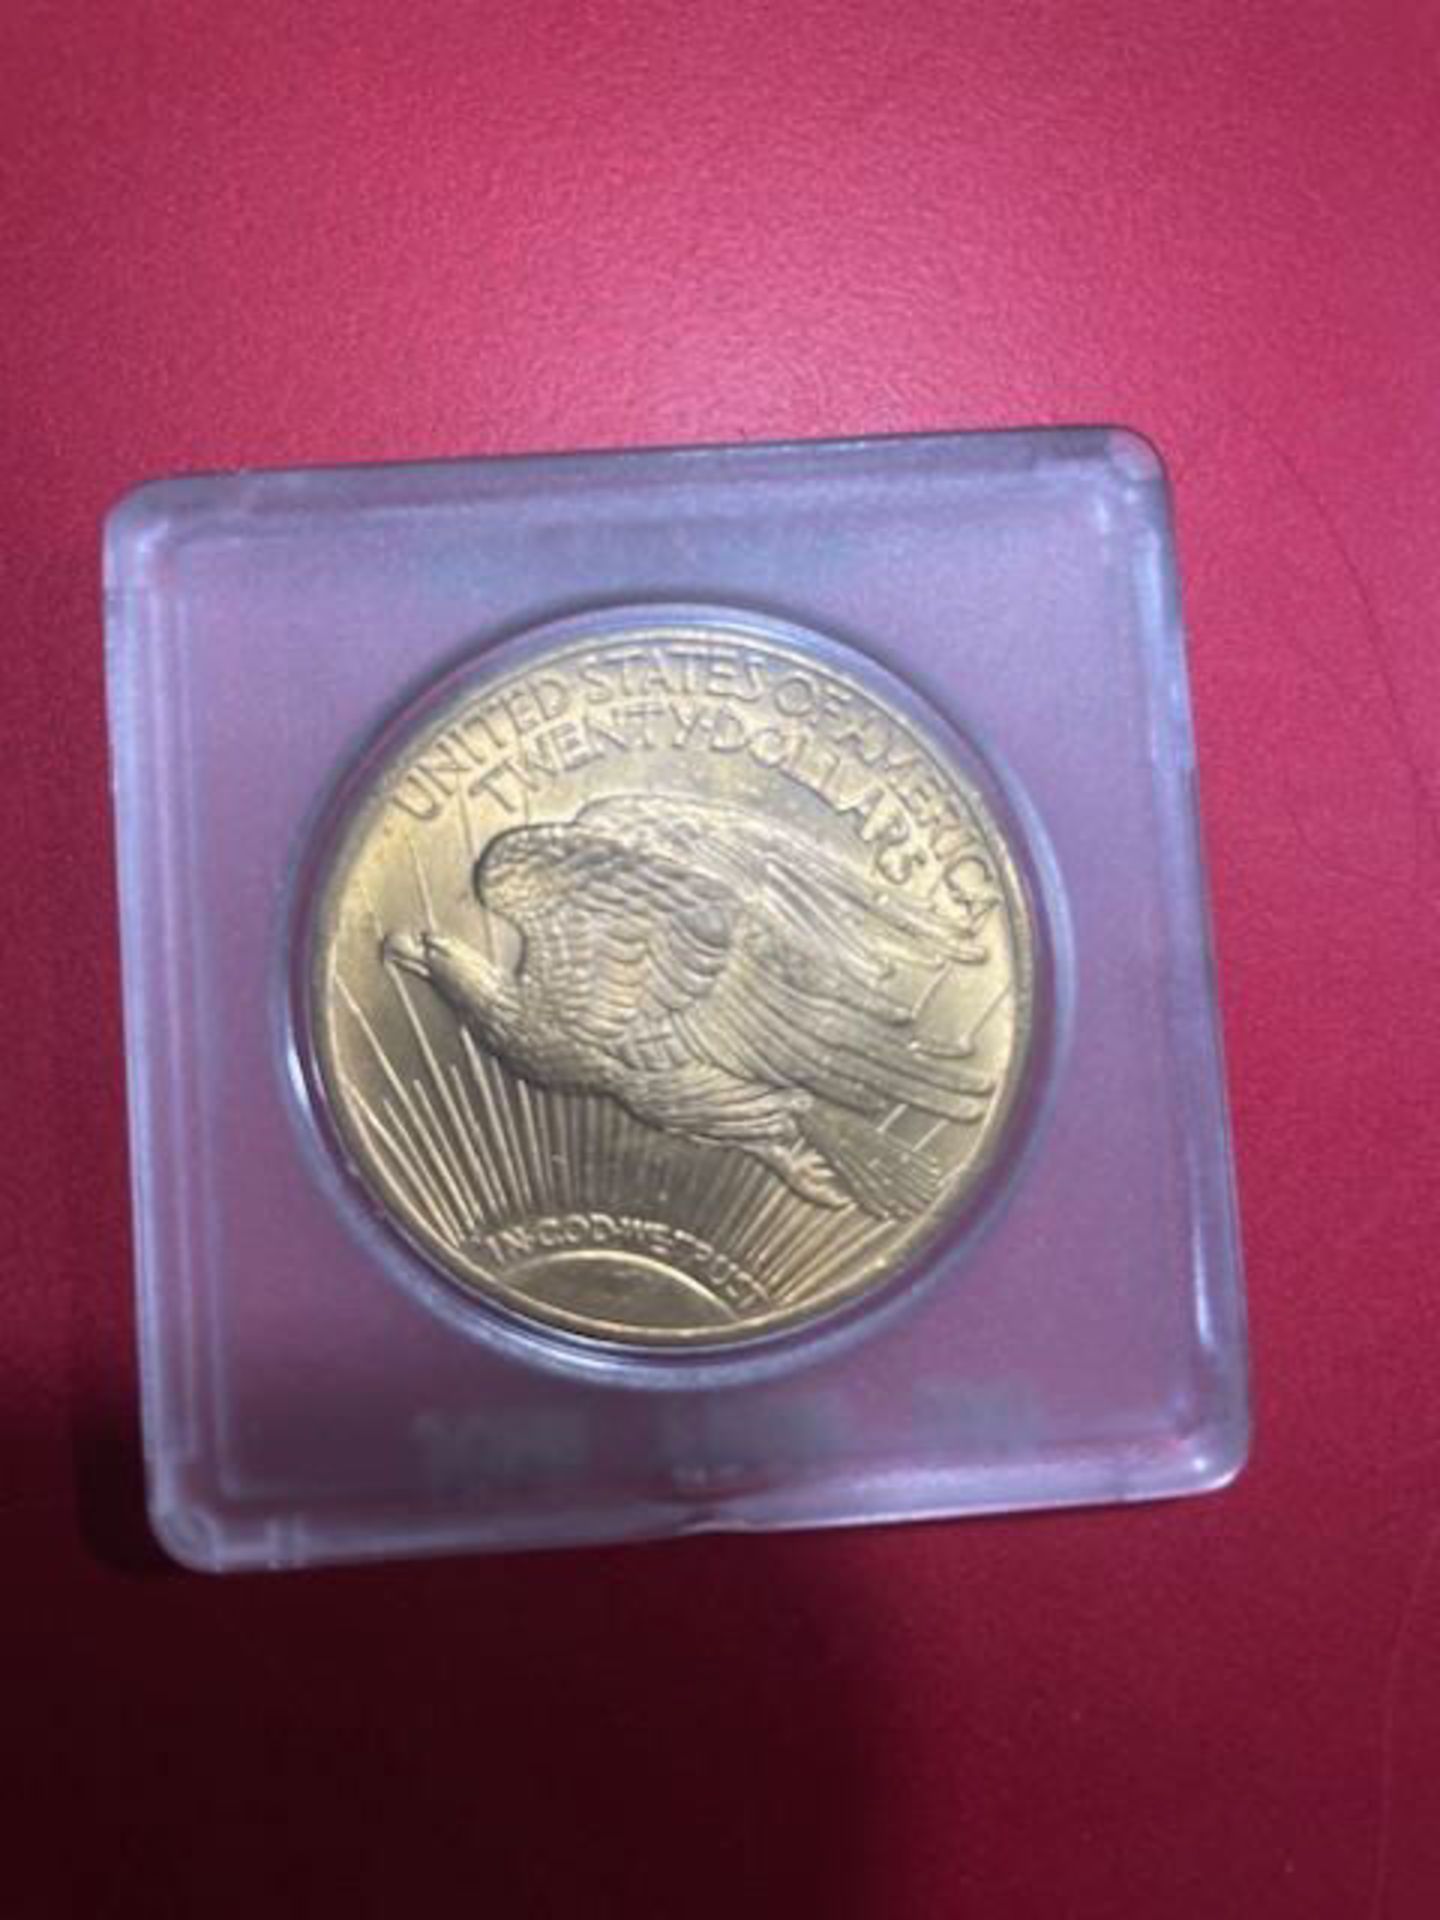 1928 St. Gaudens Double Eagle $20 Gold Coin - Image 10 of 12